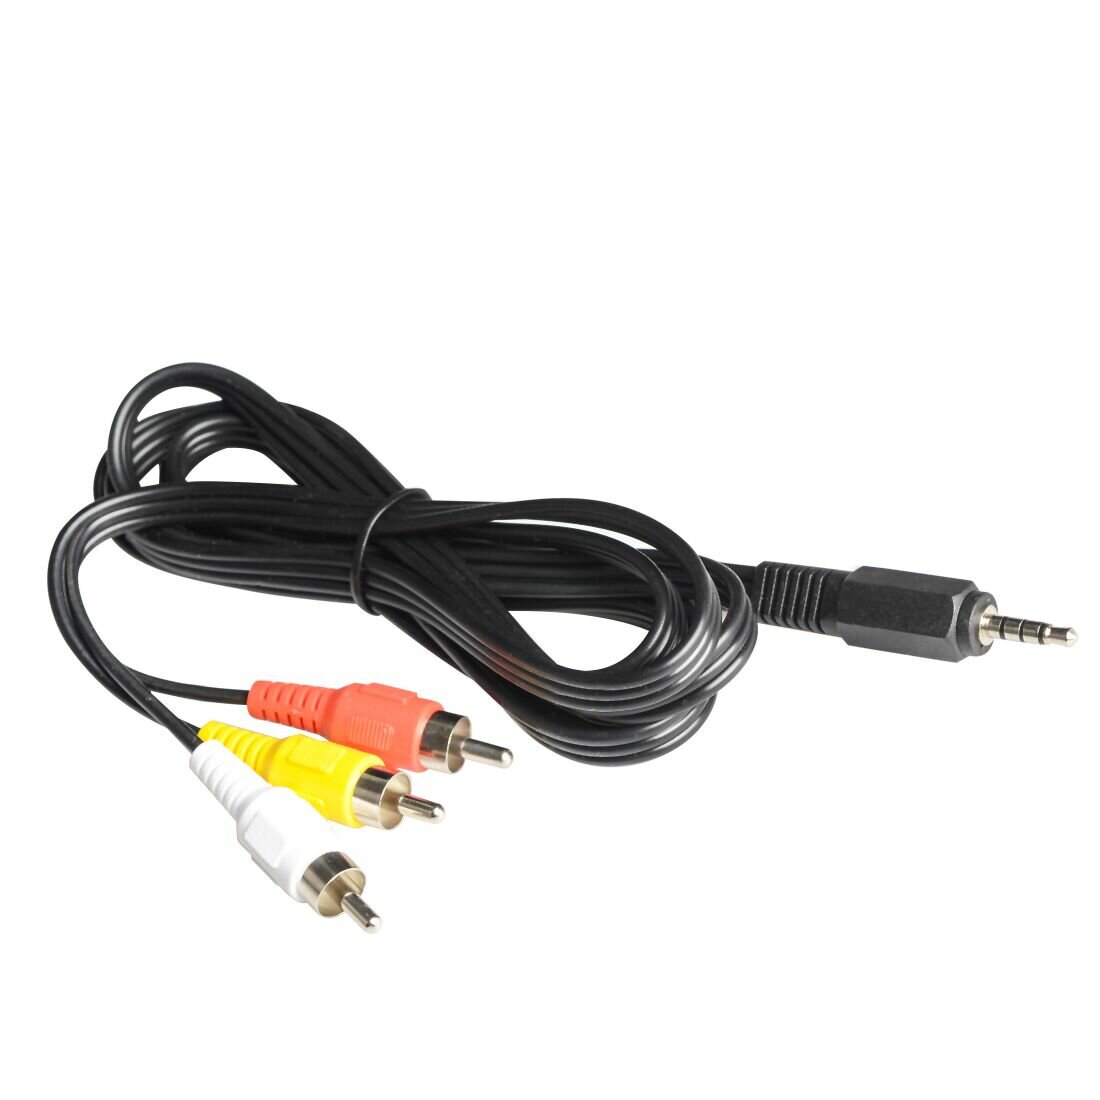 Eachine DC 3.5mm Jack Plug Male 1 to 3 Head RCA AV Input Output Video Cable 1.5m Wire Adatper Cord For Multi FPV Goggles